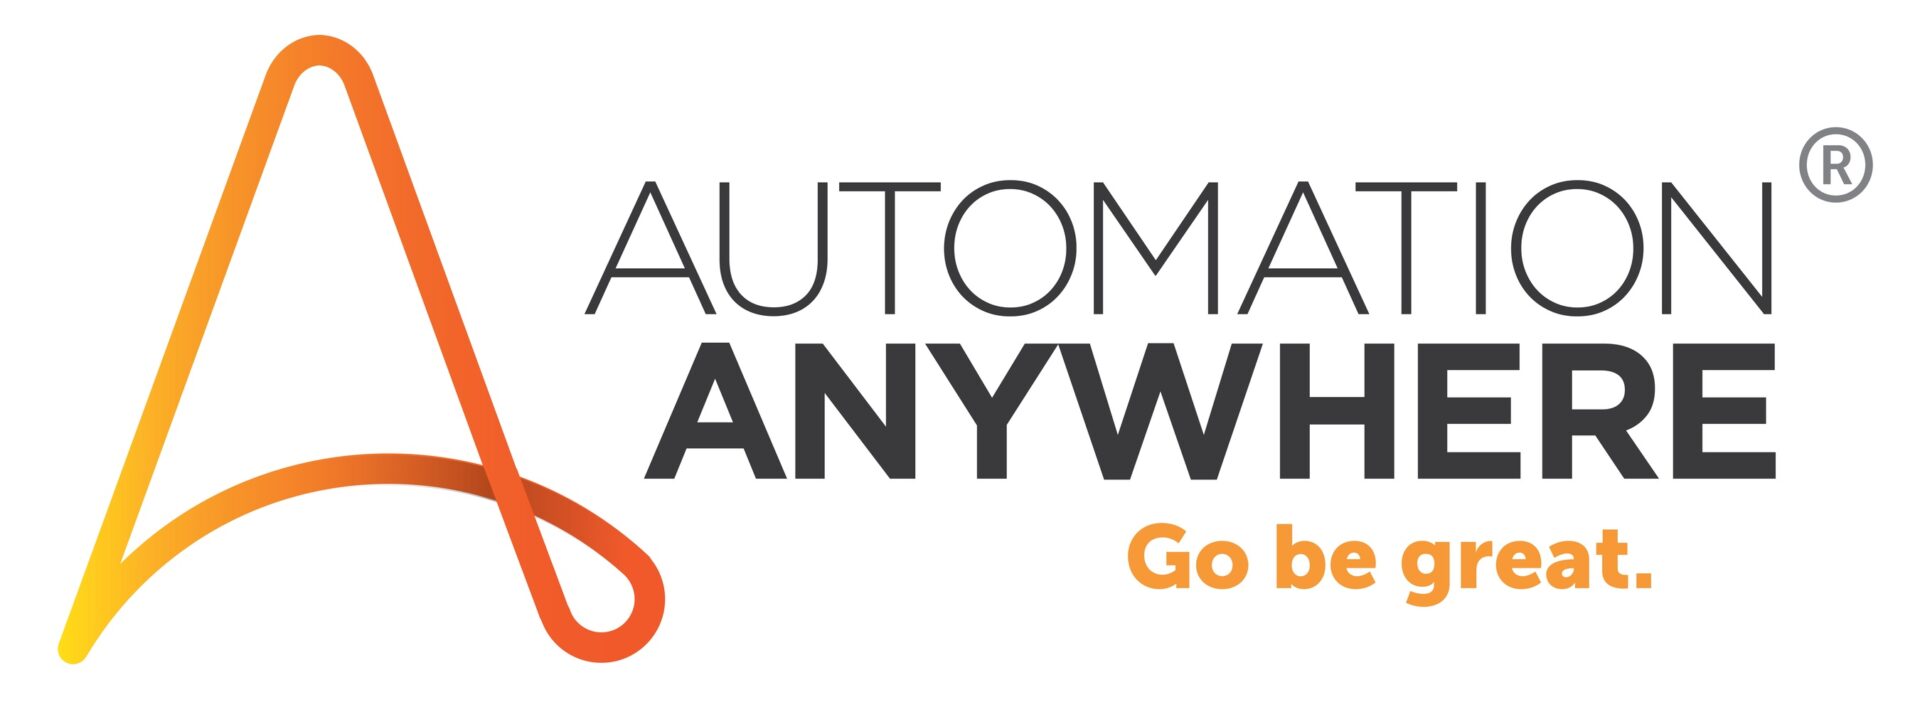 Automation Anywhere launches partnership with AWS ITOps Times